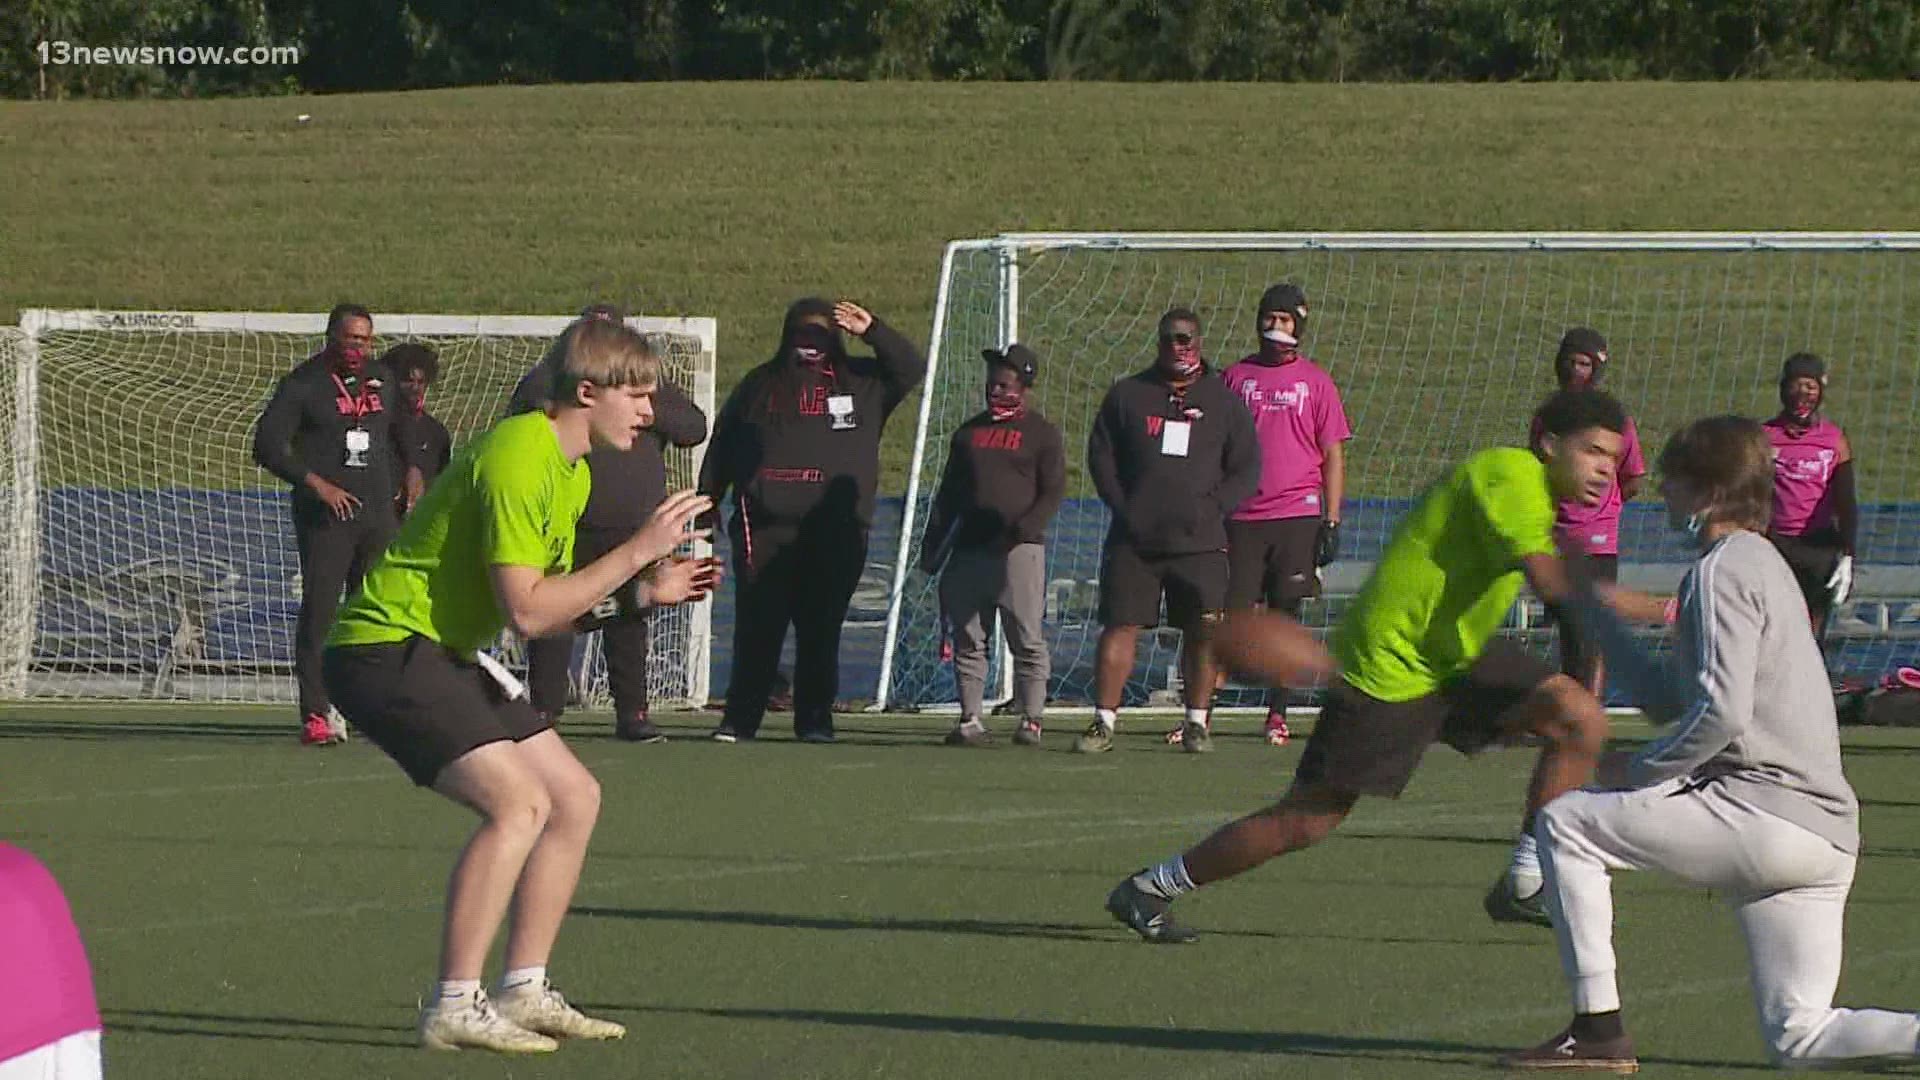 High school seniors get a chance to play Friday night non-tackle football at the Sportsplex